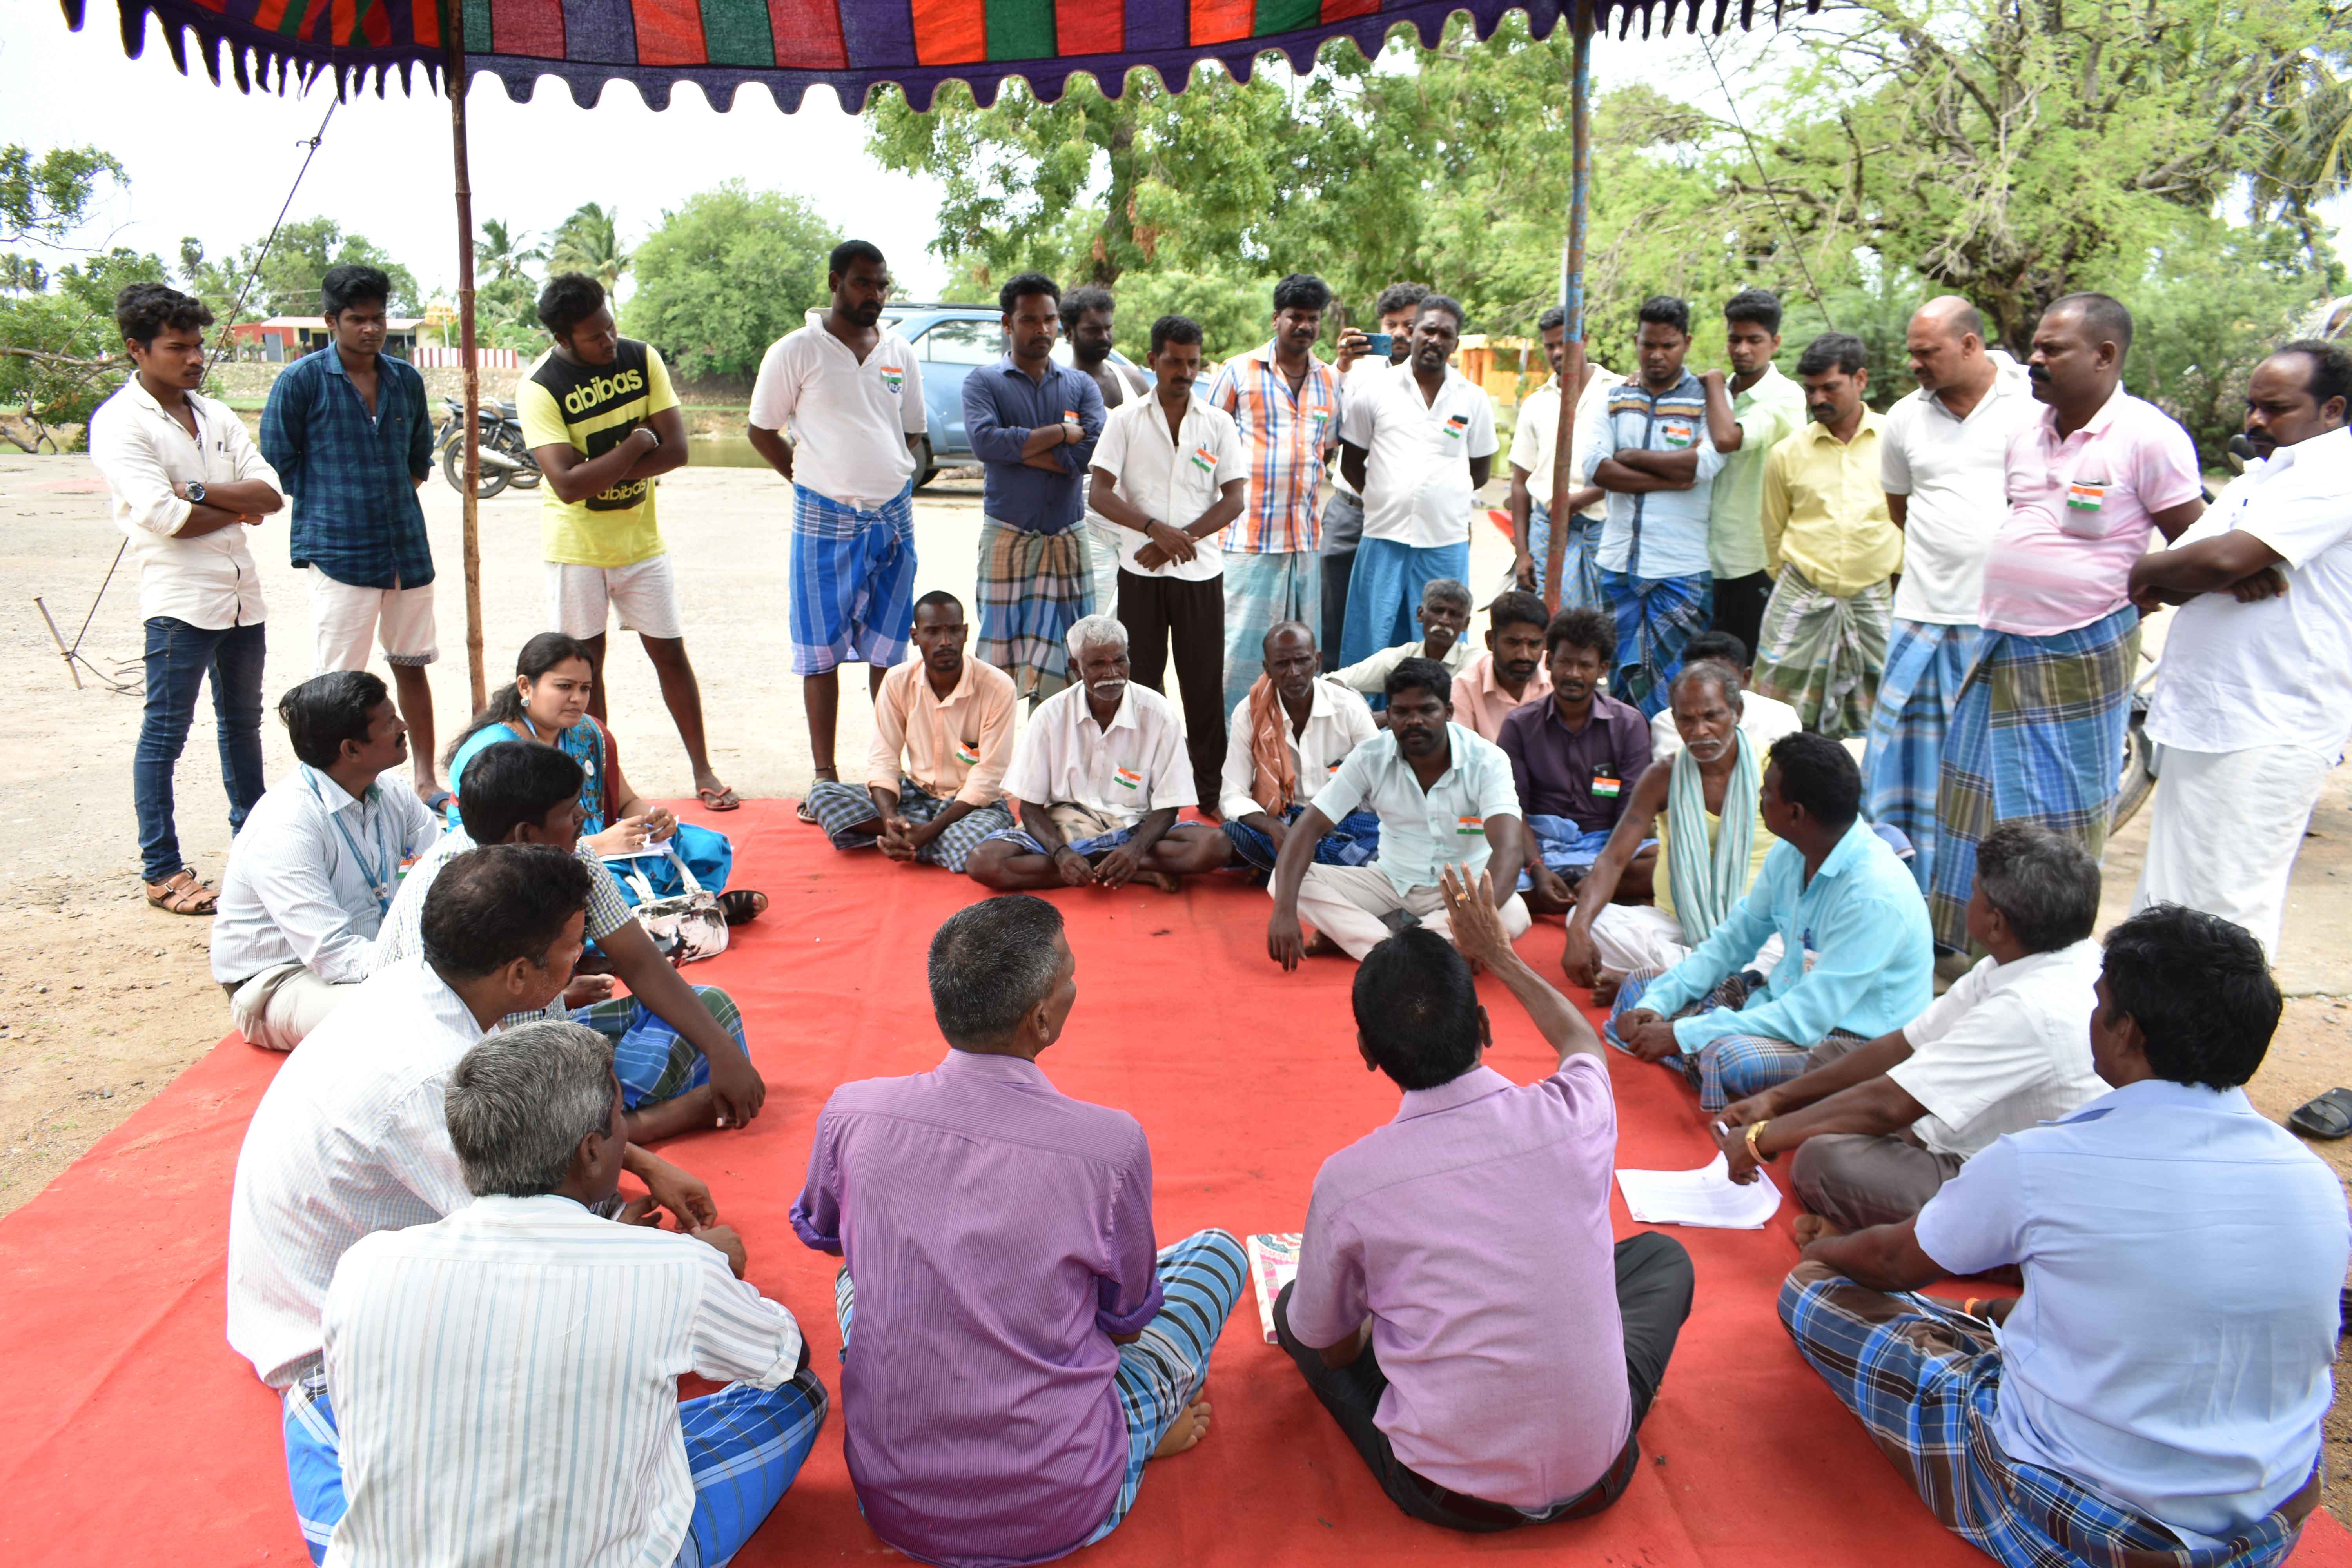 AVIT UBA cell members discussing  with villagers in Unnat Bharat Aghiyan meeting
